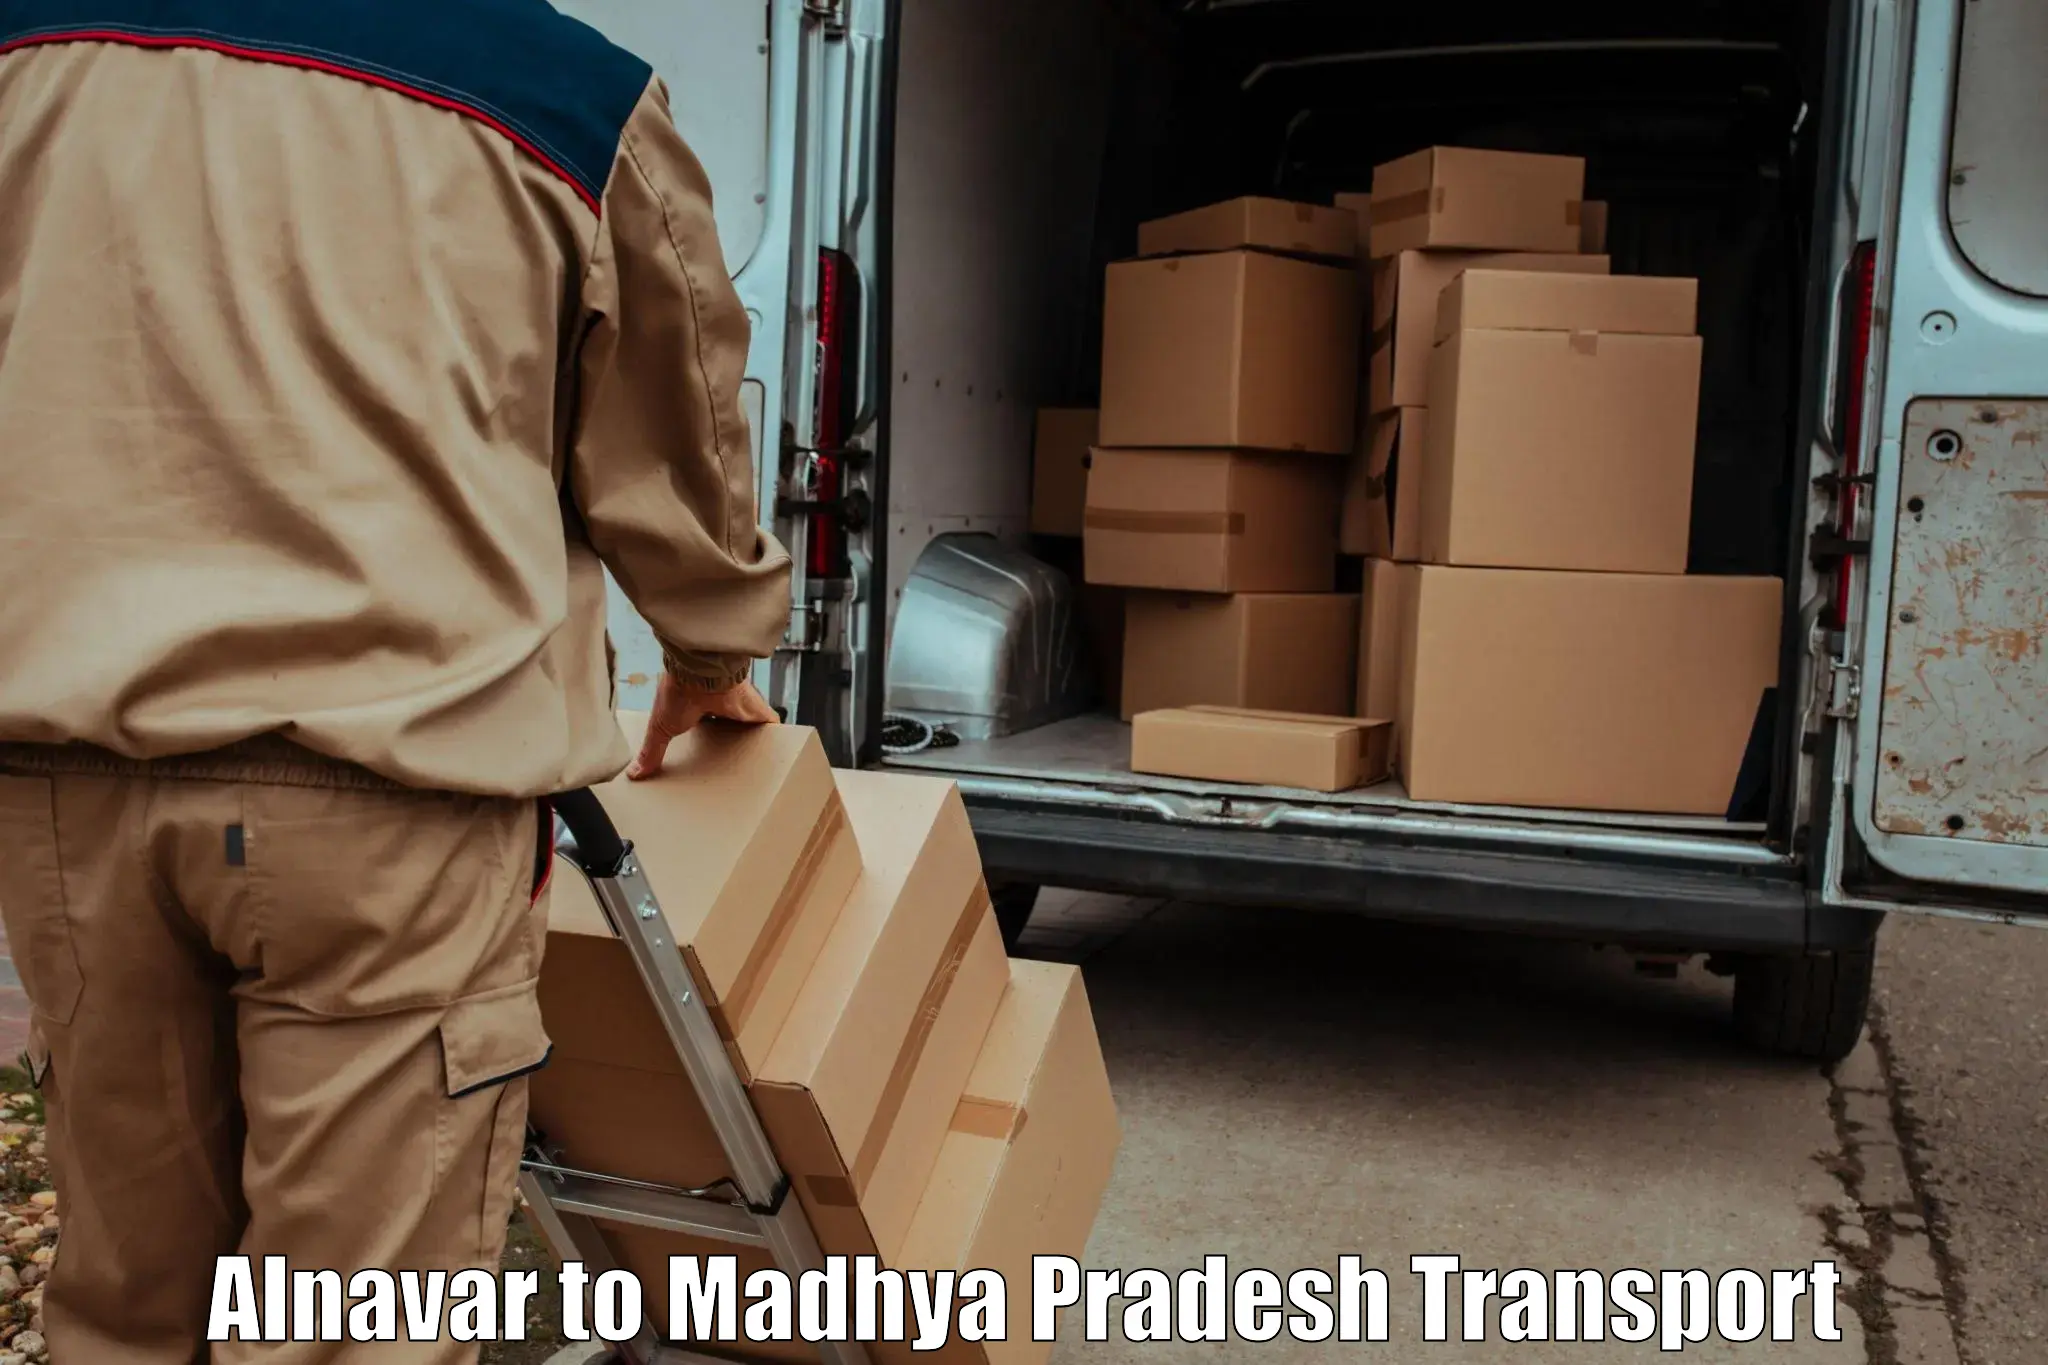 Goods delivery service Alnavar to BHEL Bhopal